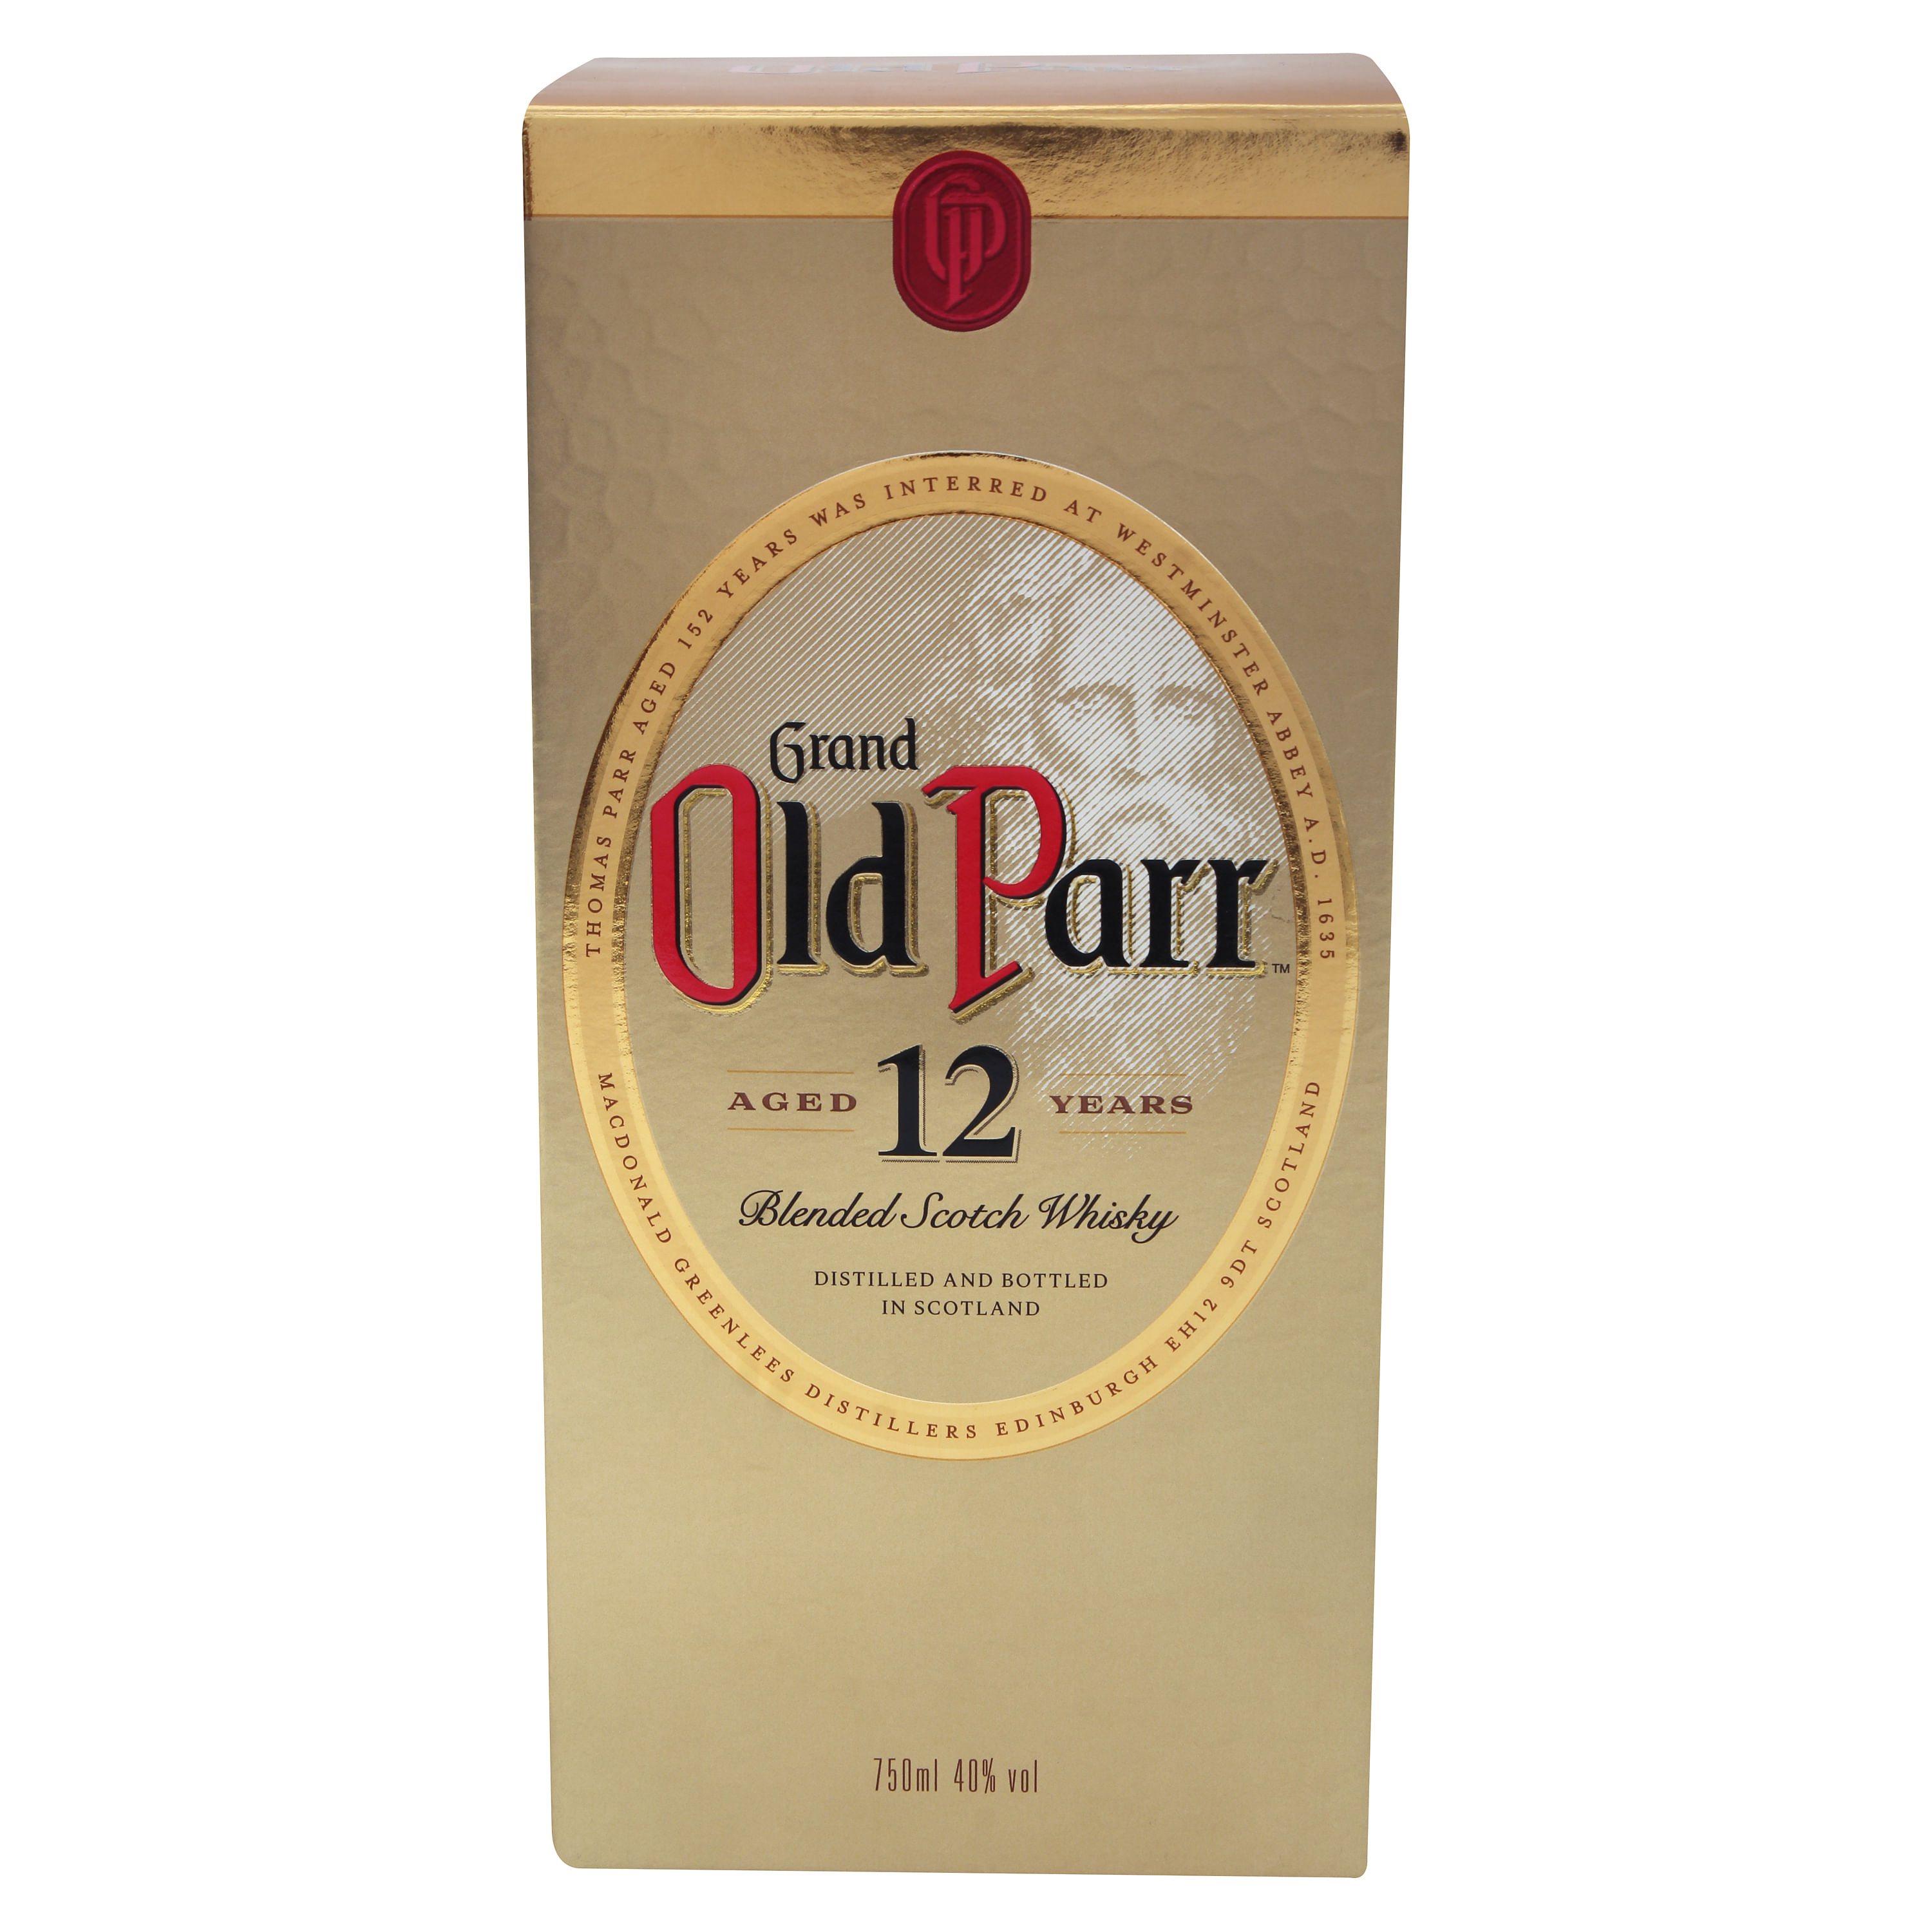 Whisky-Old-Parr-12-a-os-750ml-1-5048